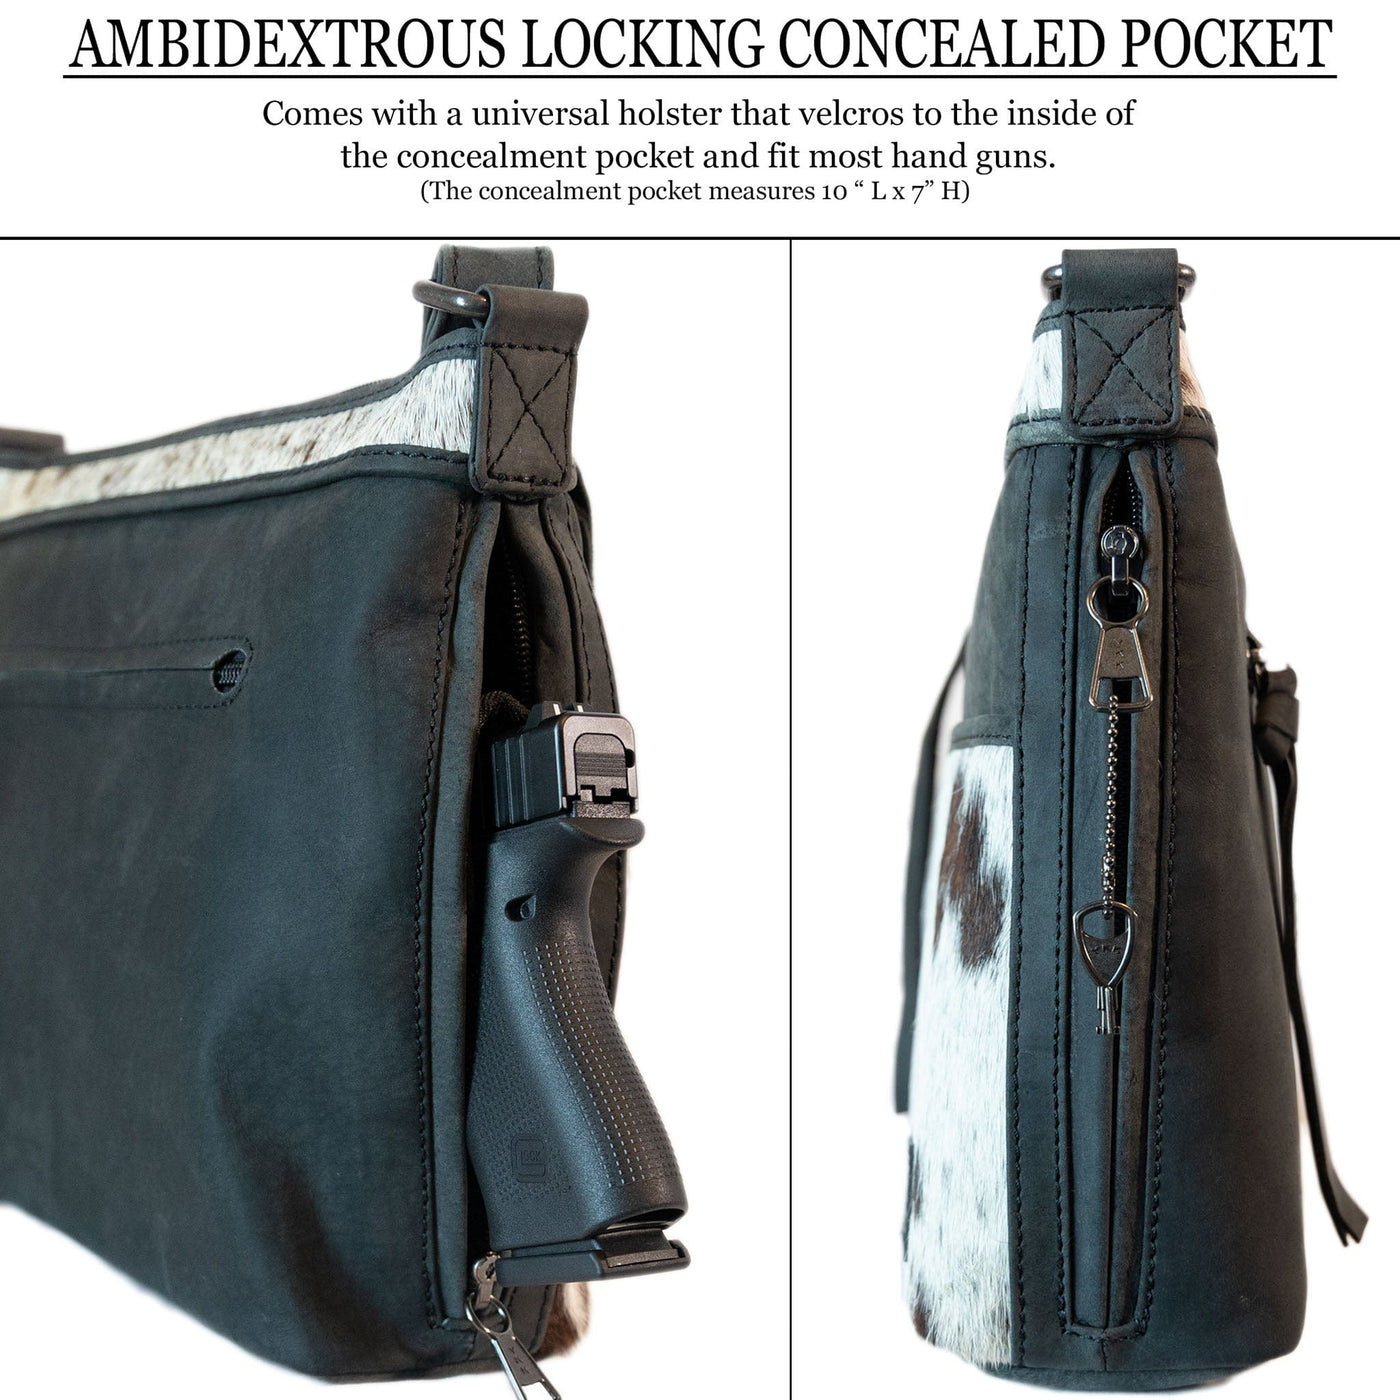 Concealed Carry Diana Crossbody by UC Leather Company -  soft leather shoulder bags for women's -  crossbody bags for everyday use -  most popular crossbody bag -  crossbody bags for guns -  crossbody handgun bag -  Unique Hide Purse -  Conceal Carry Western Purse -  Stylish CCW Bag -  Bag for Conceal Carrying Women - -  Gun Bag for Women